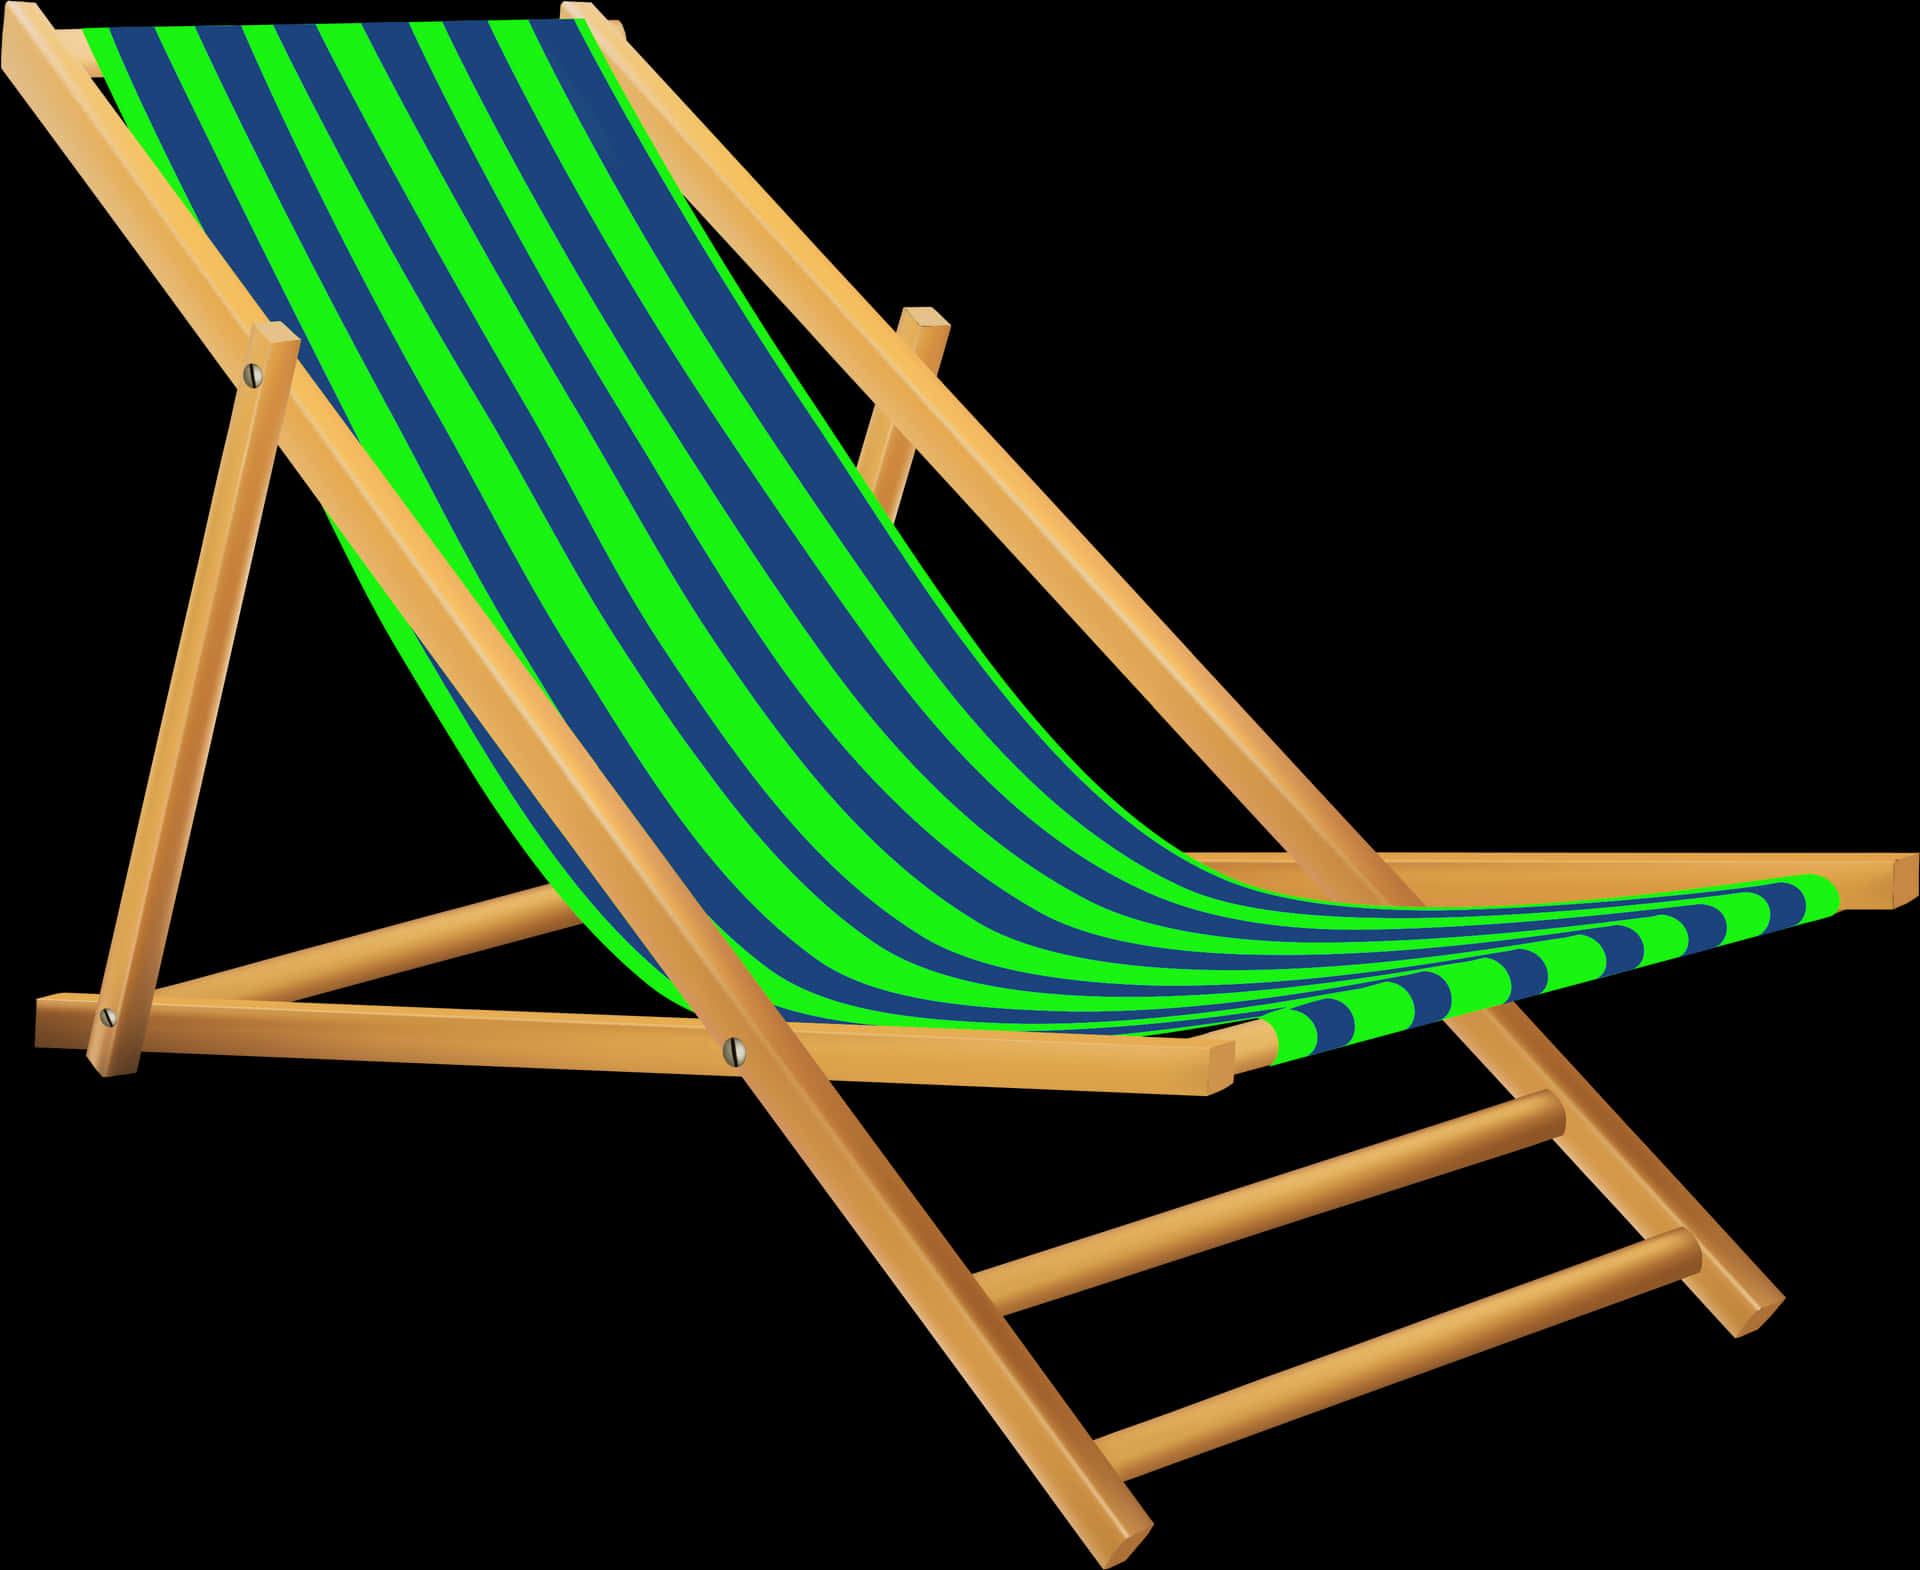 Striped Deck Chair Graphic PNG